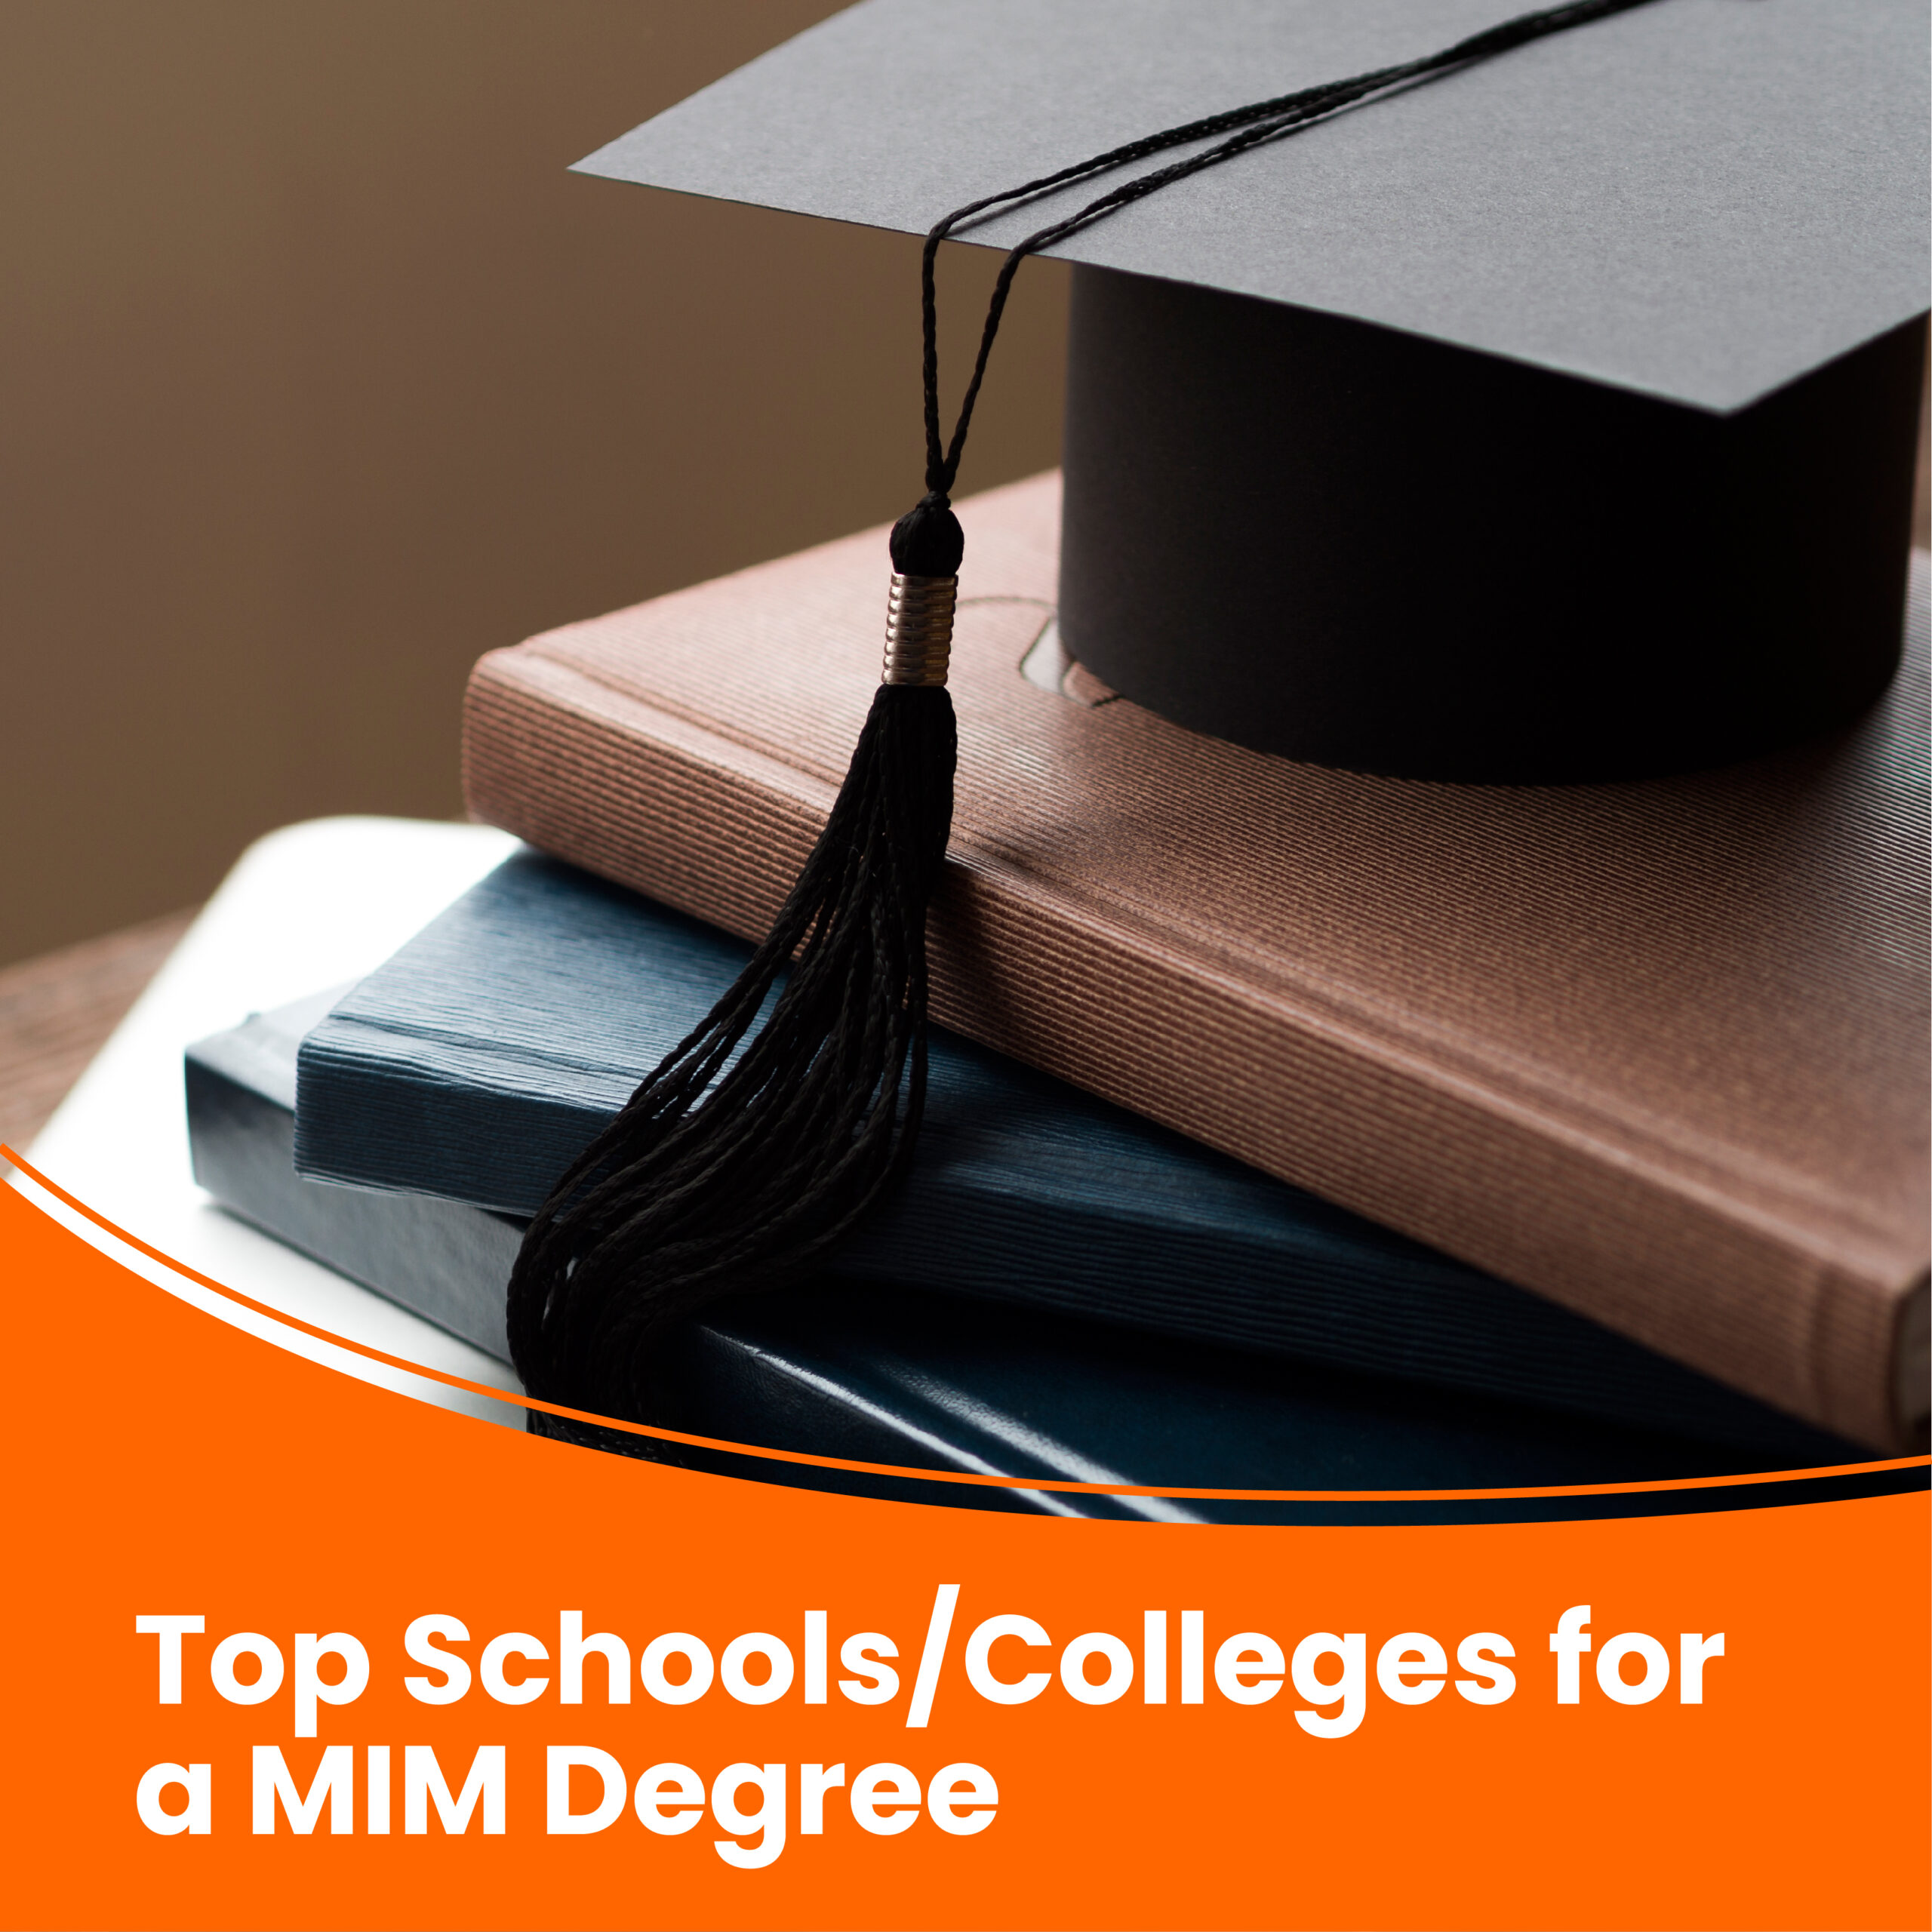 Top schools/Colleges for a MIM degree